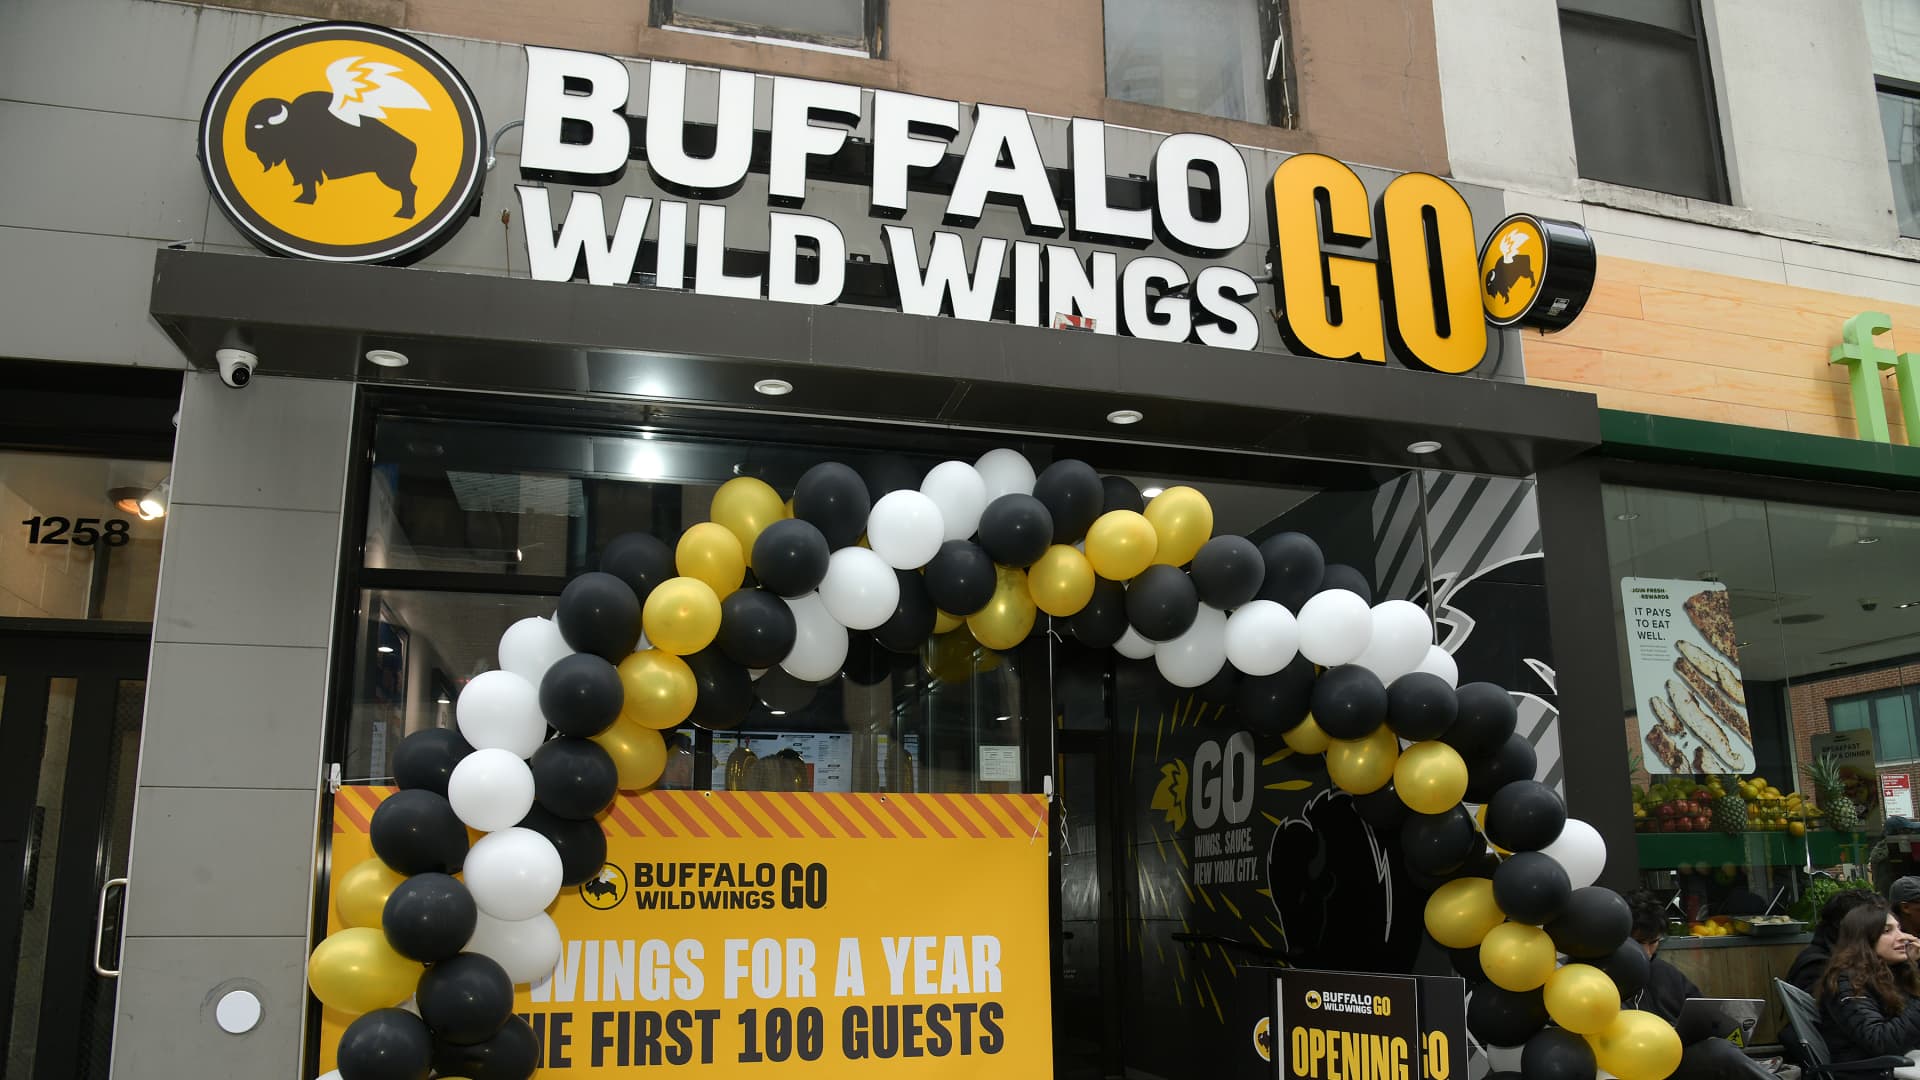 Buffalo Wild Wings Go format grows as more sales move off premise